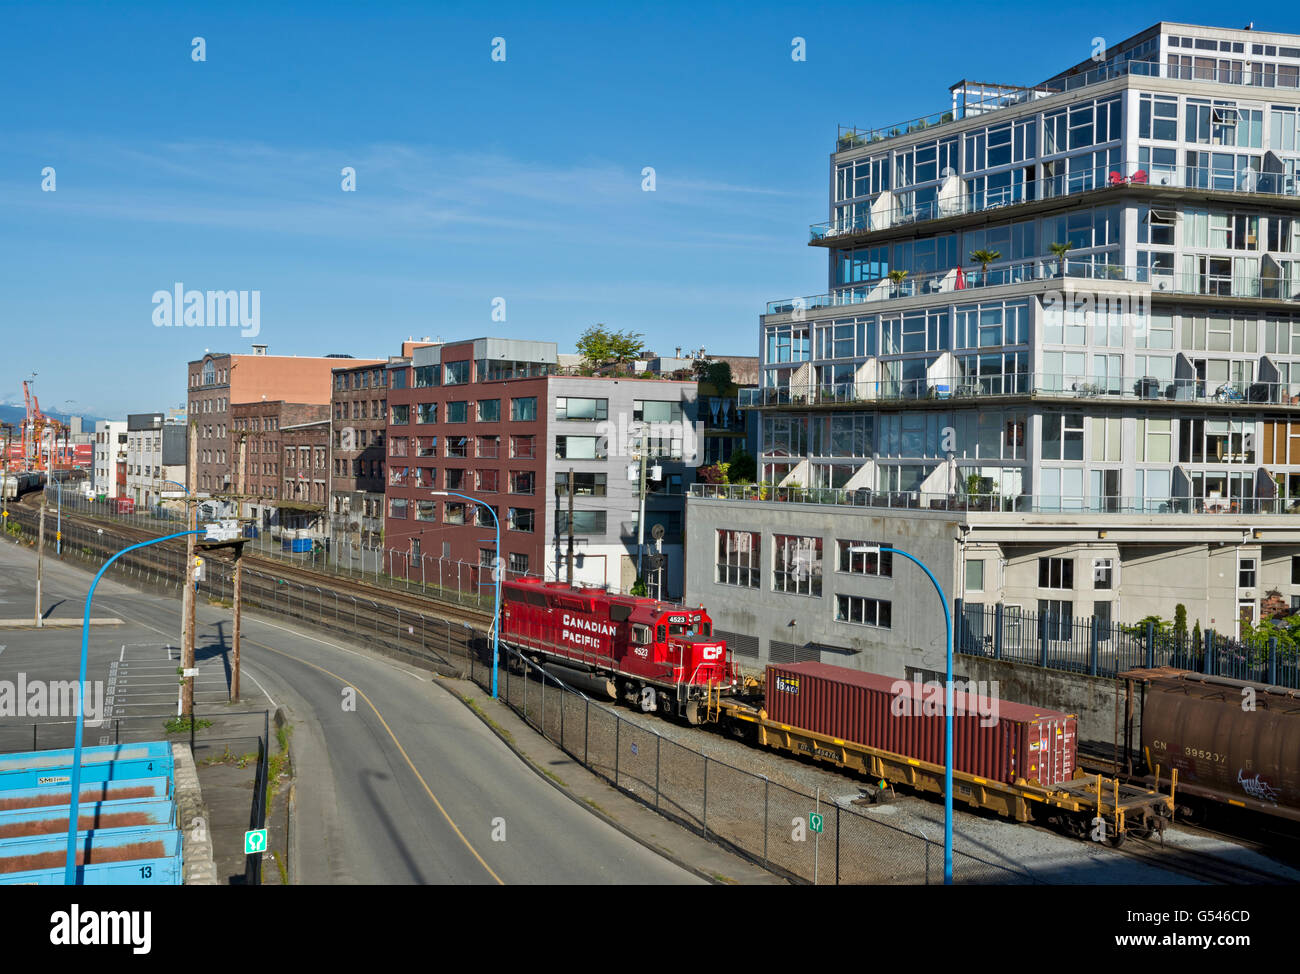 Industrial area with apartments condos by the train tracks in Vancouver's Downtown Eastside Railtown neighourhood Stock Photo